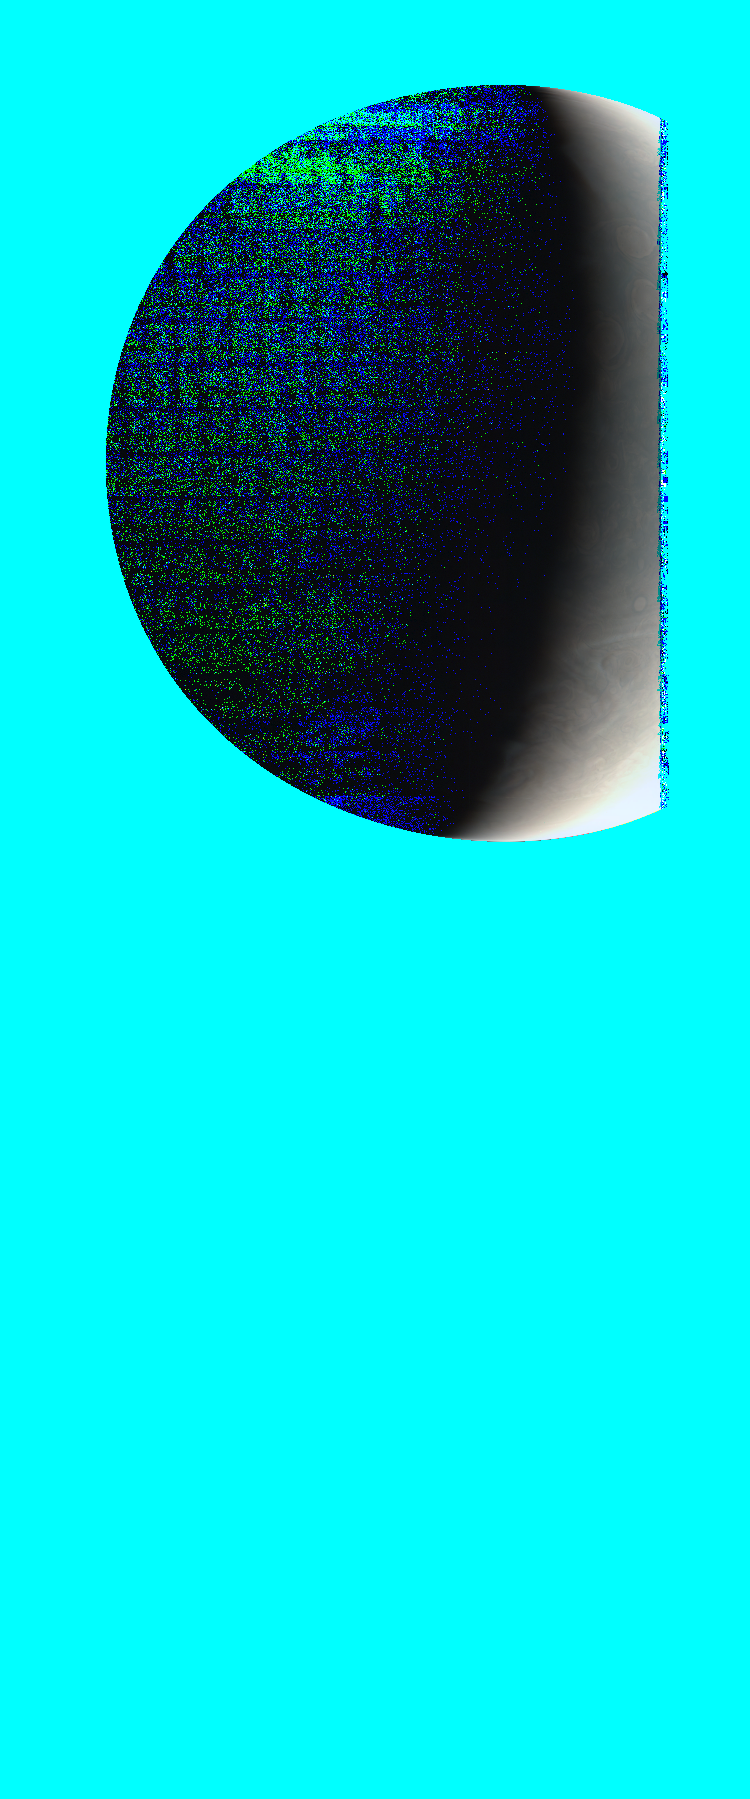 JNCE_2019307_23C00009_V01-raw.bmp_mask_10px_30.149000s_cx814.0_000000_decompanded.bmp_sphC_.png